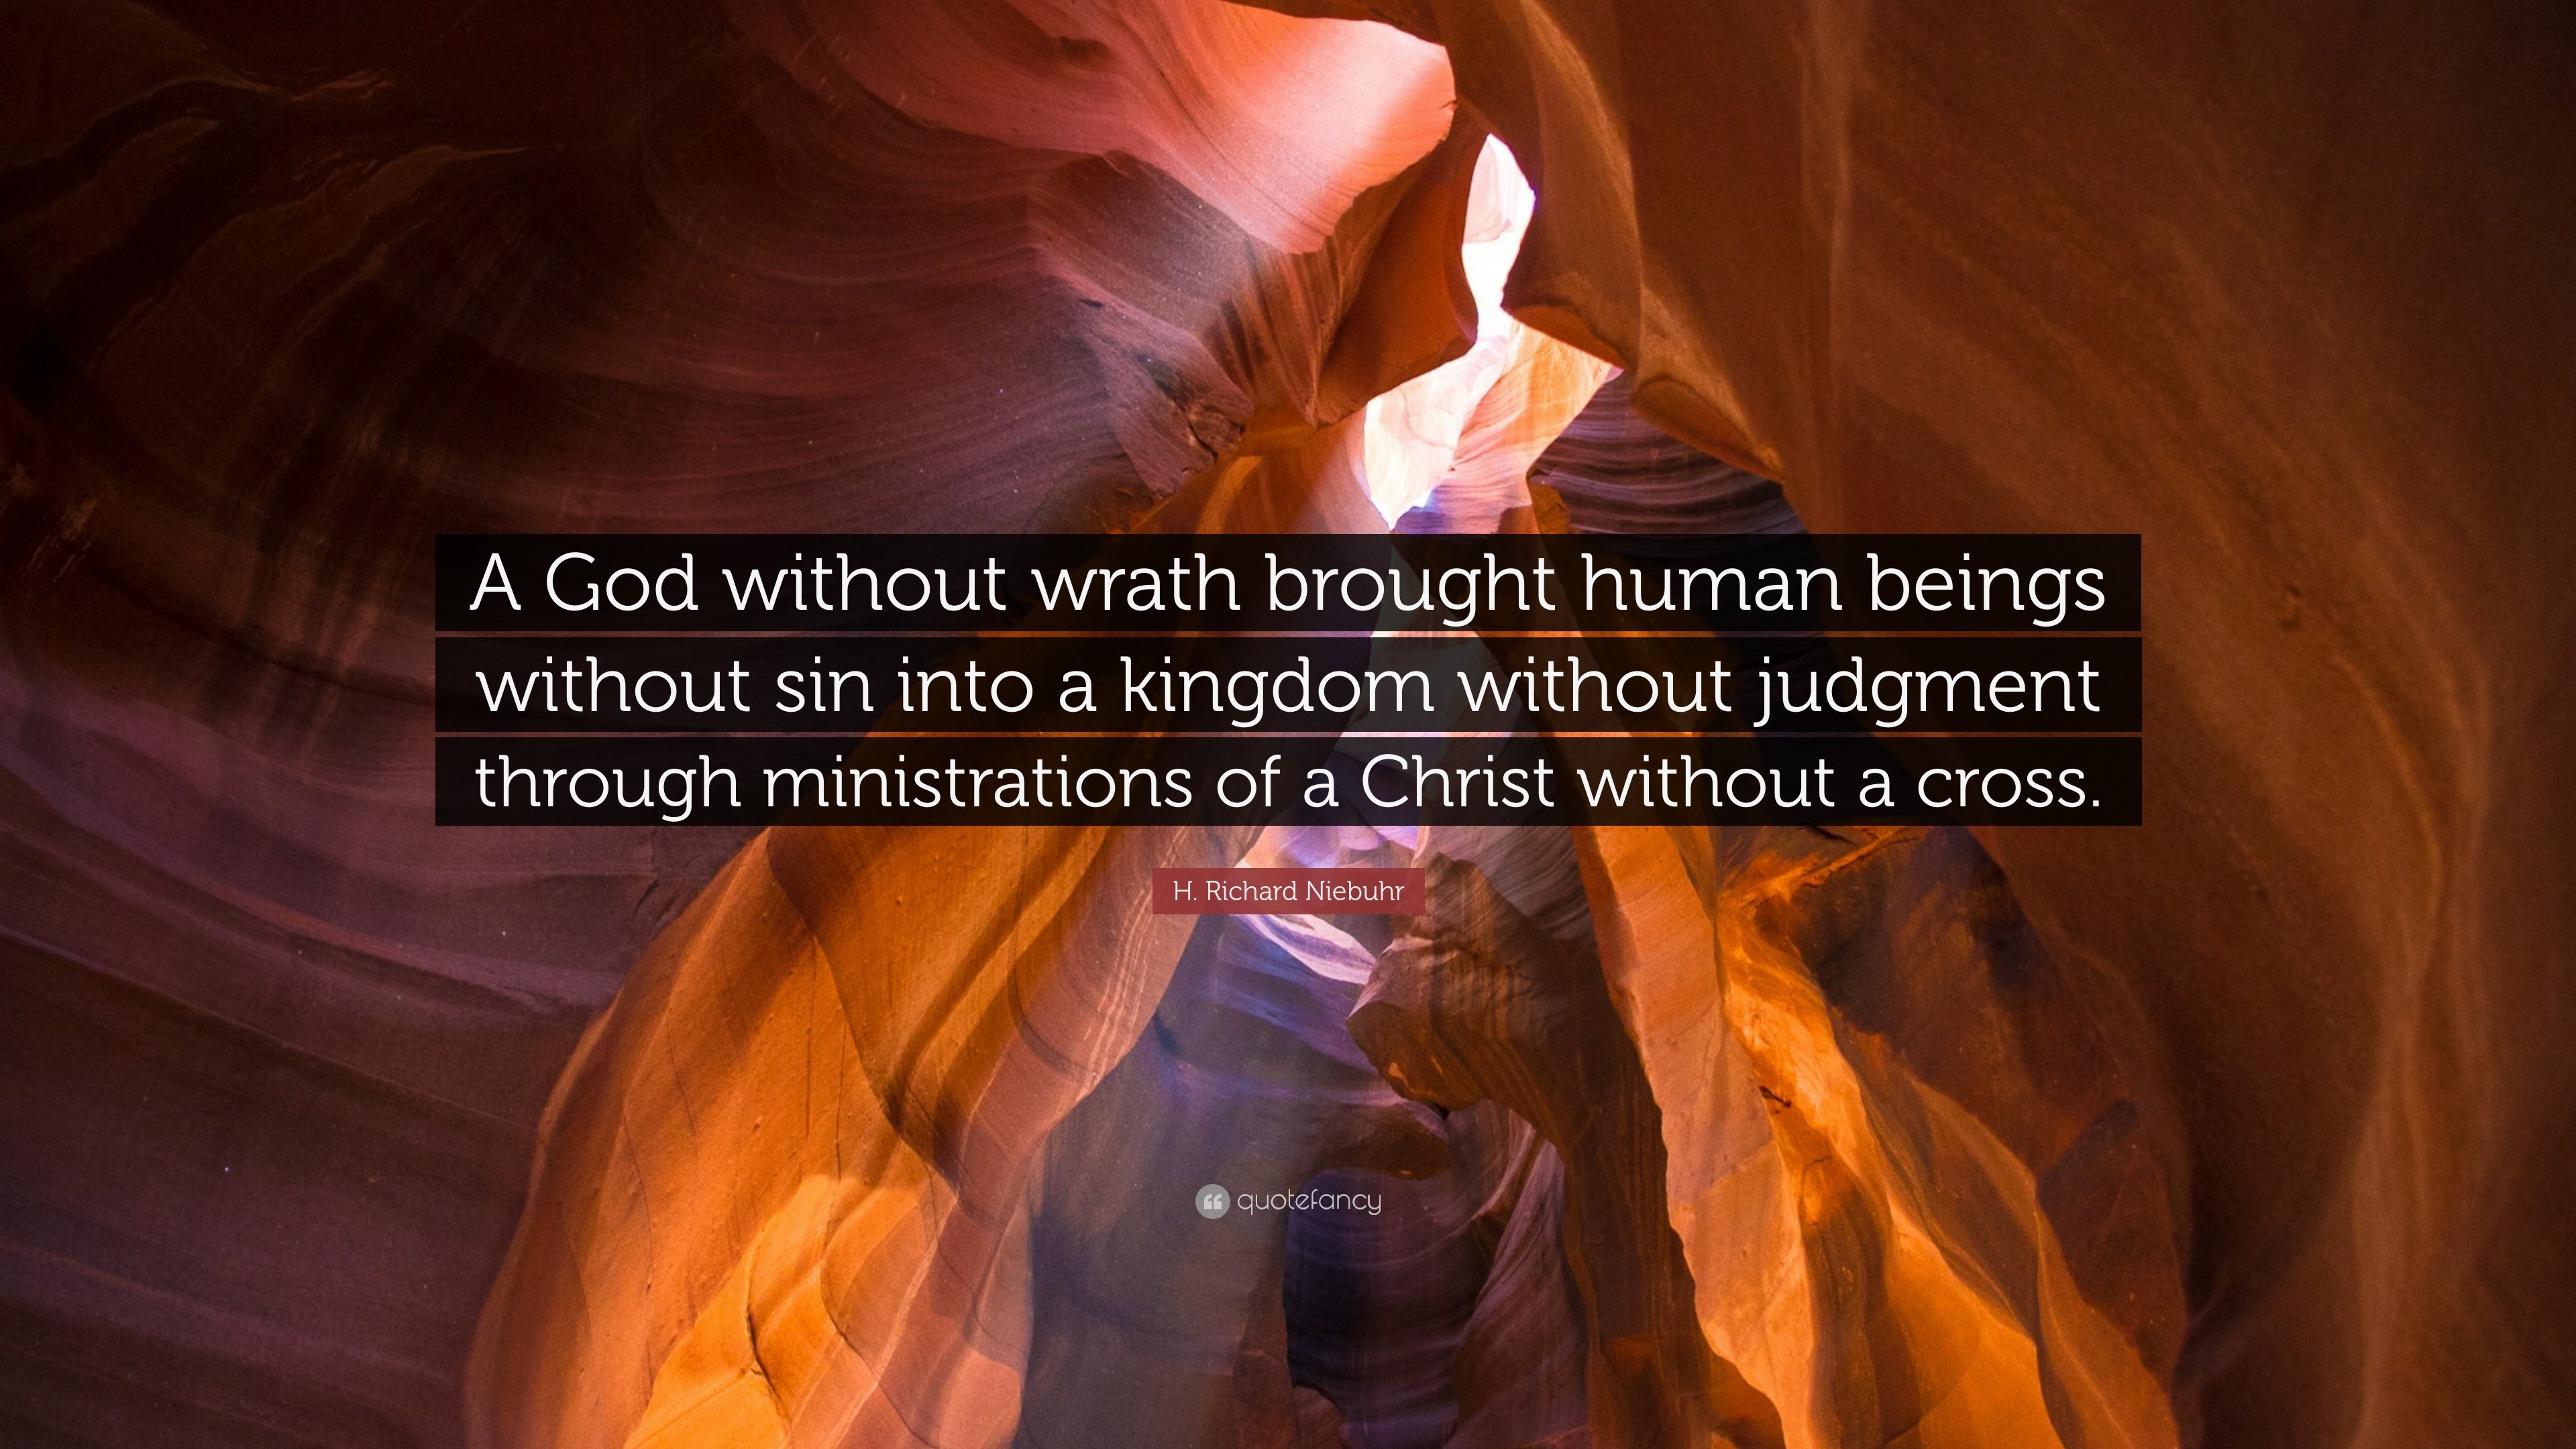 H. Richard Niebuhr Quote: “A God without wrath brought human beings